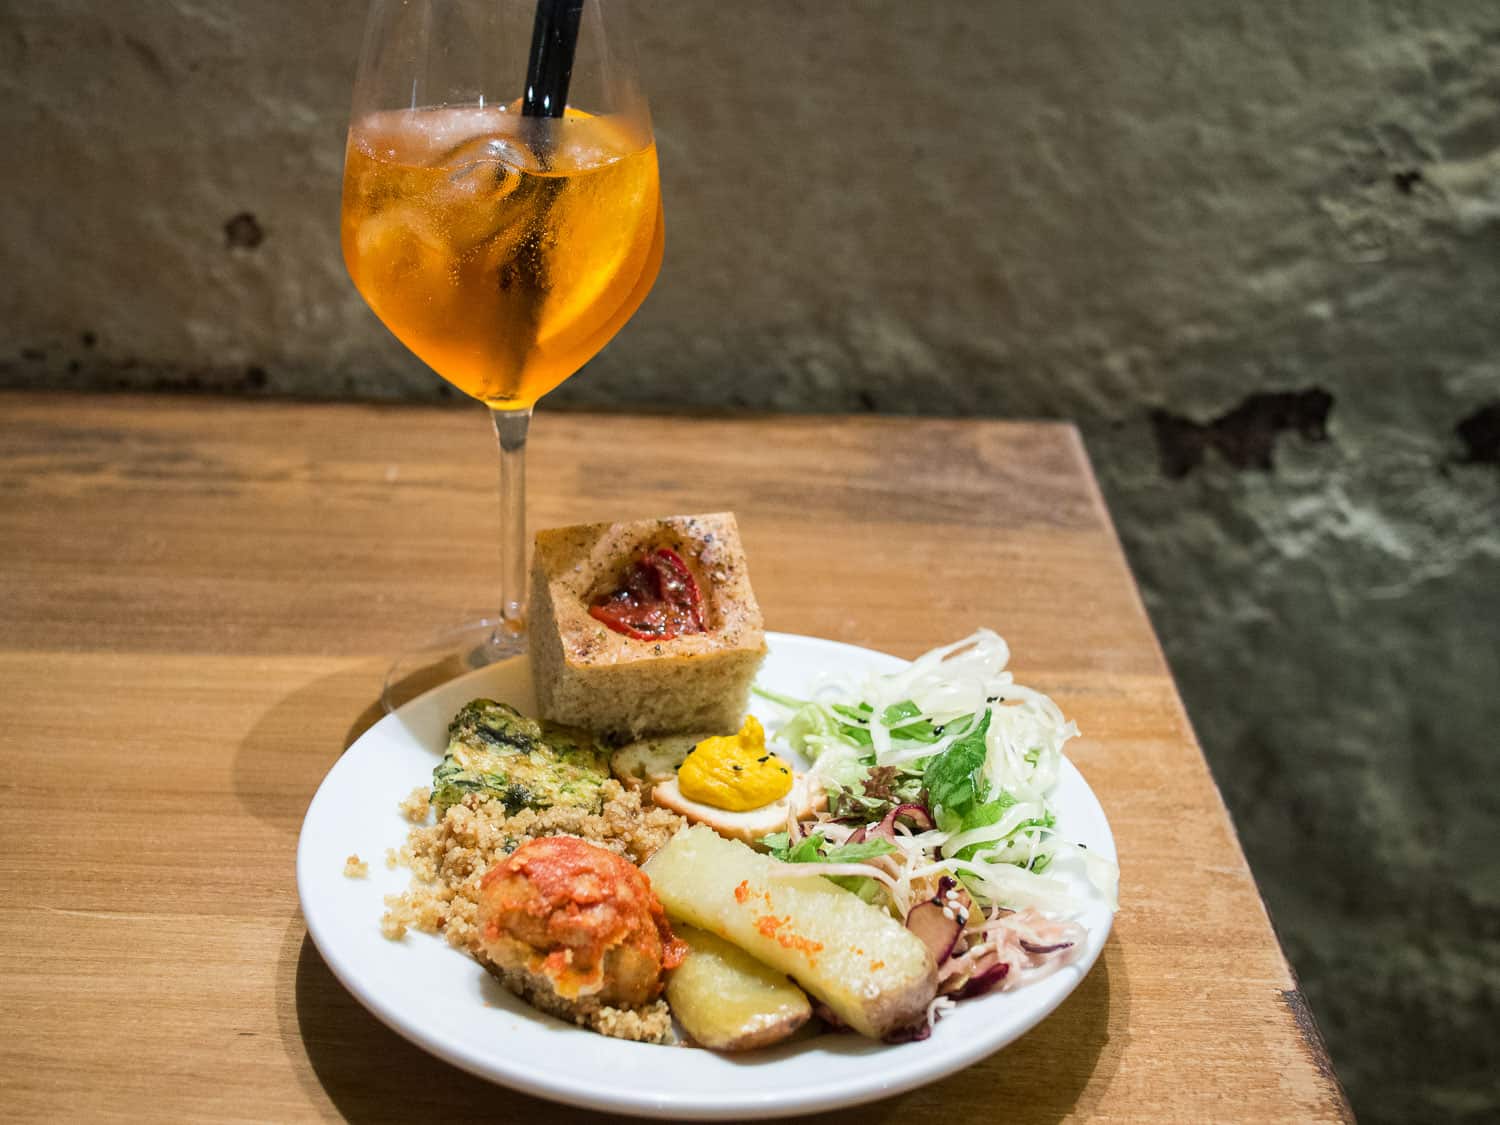 Spritz and a plate from the vegetarian aperitivo buffet at Ketumbar, Testaccio in Rome